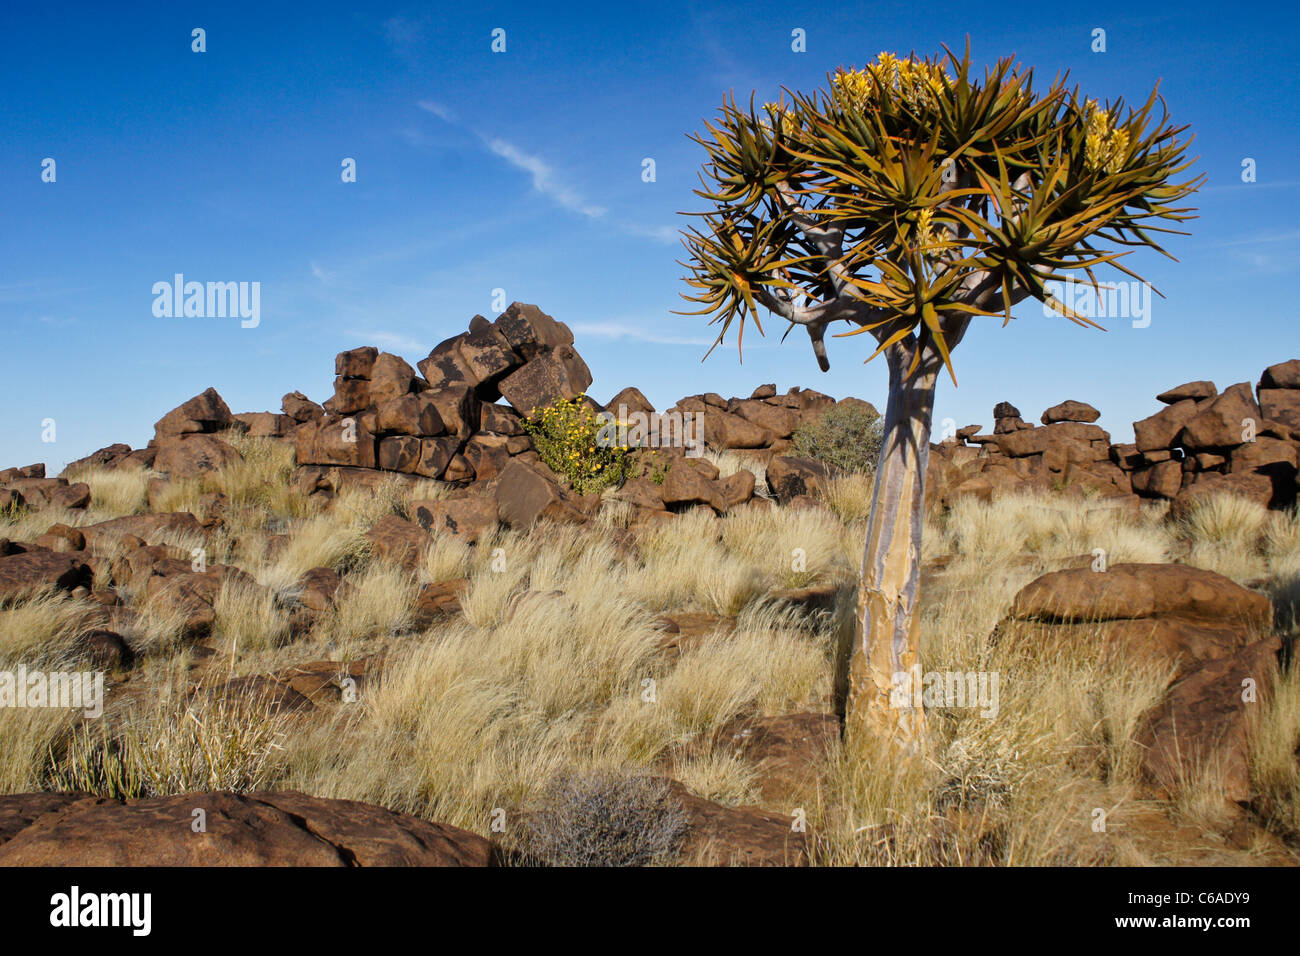 Quivertree in bloom, Giants' Playground, Namibia Stock Photo